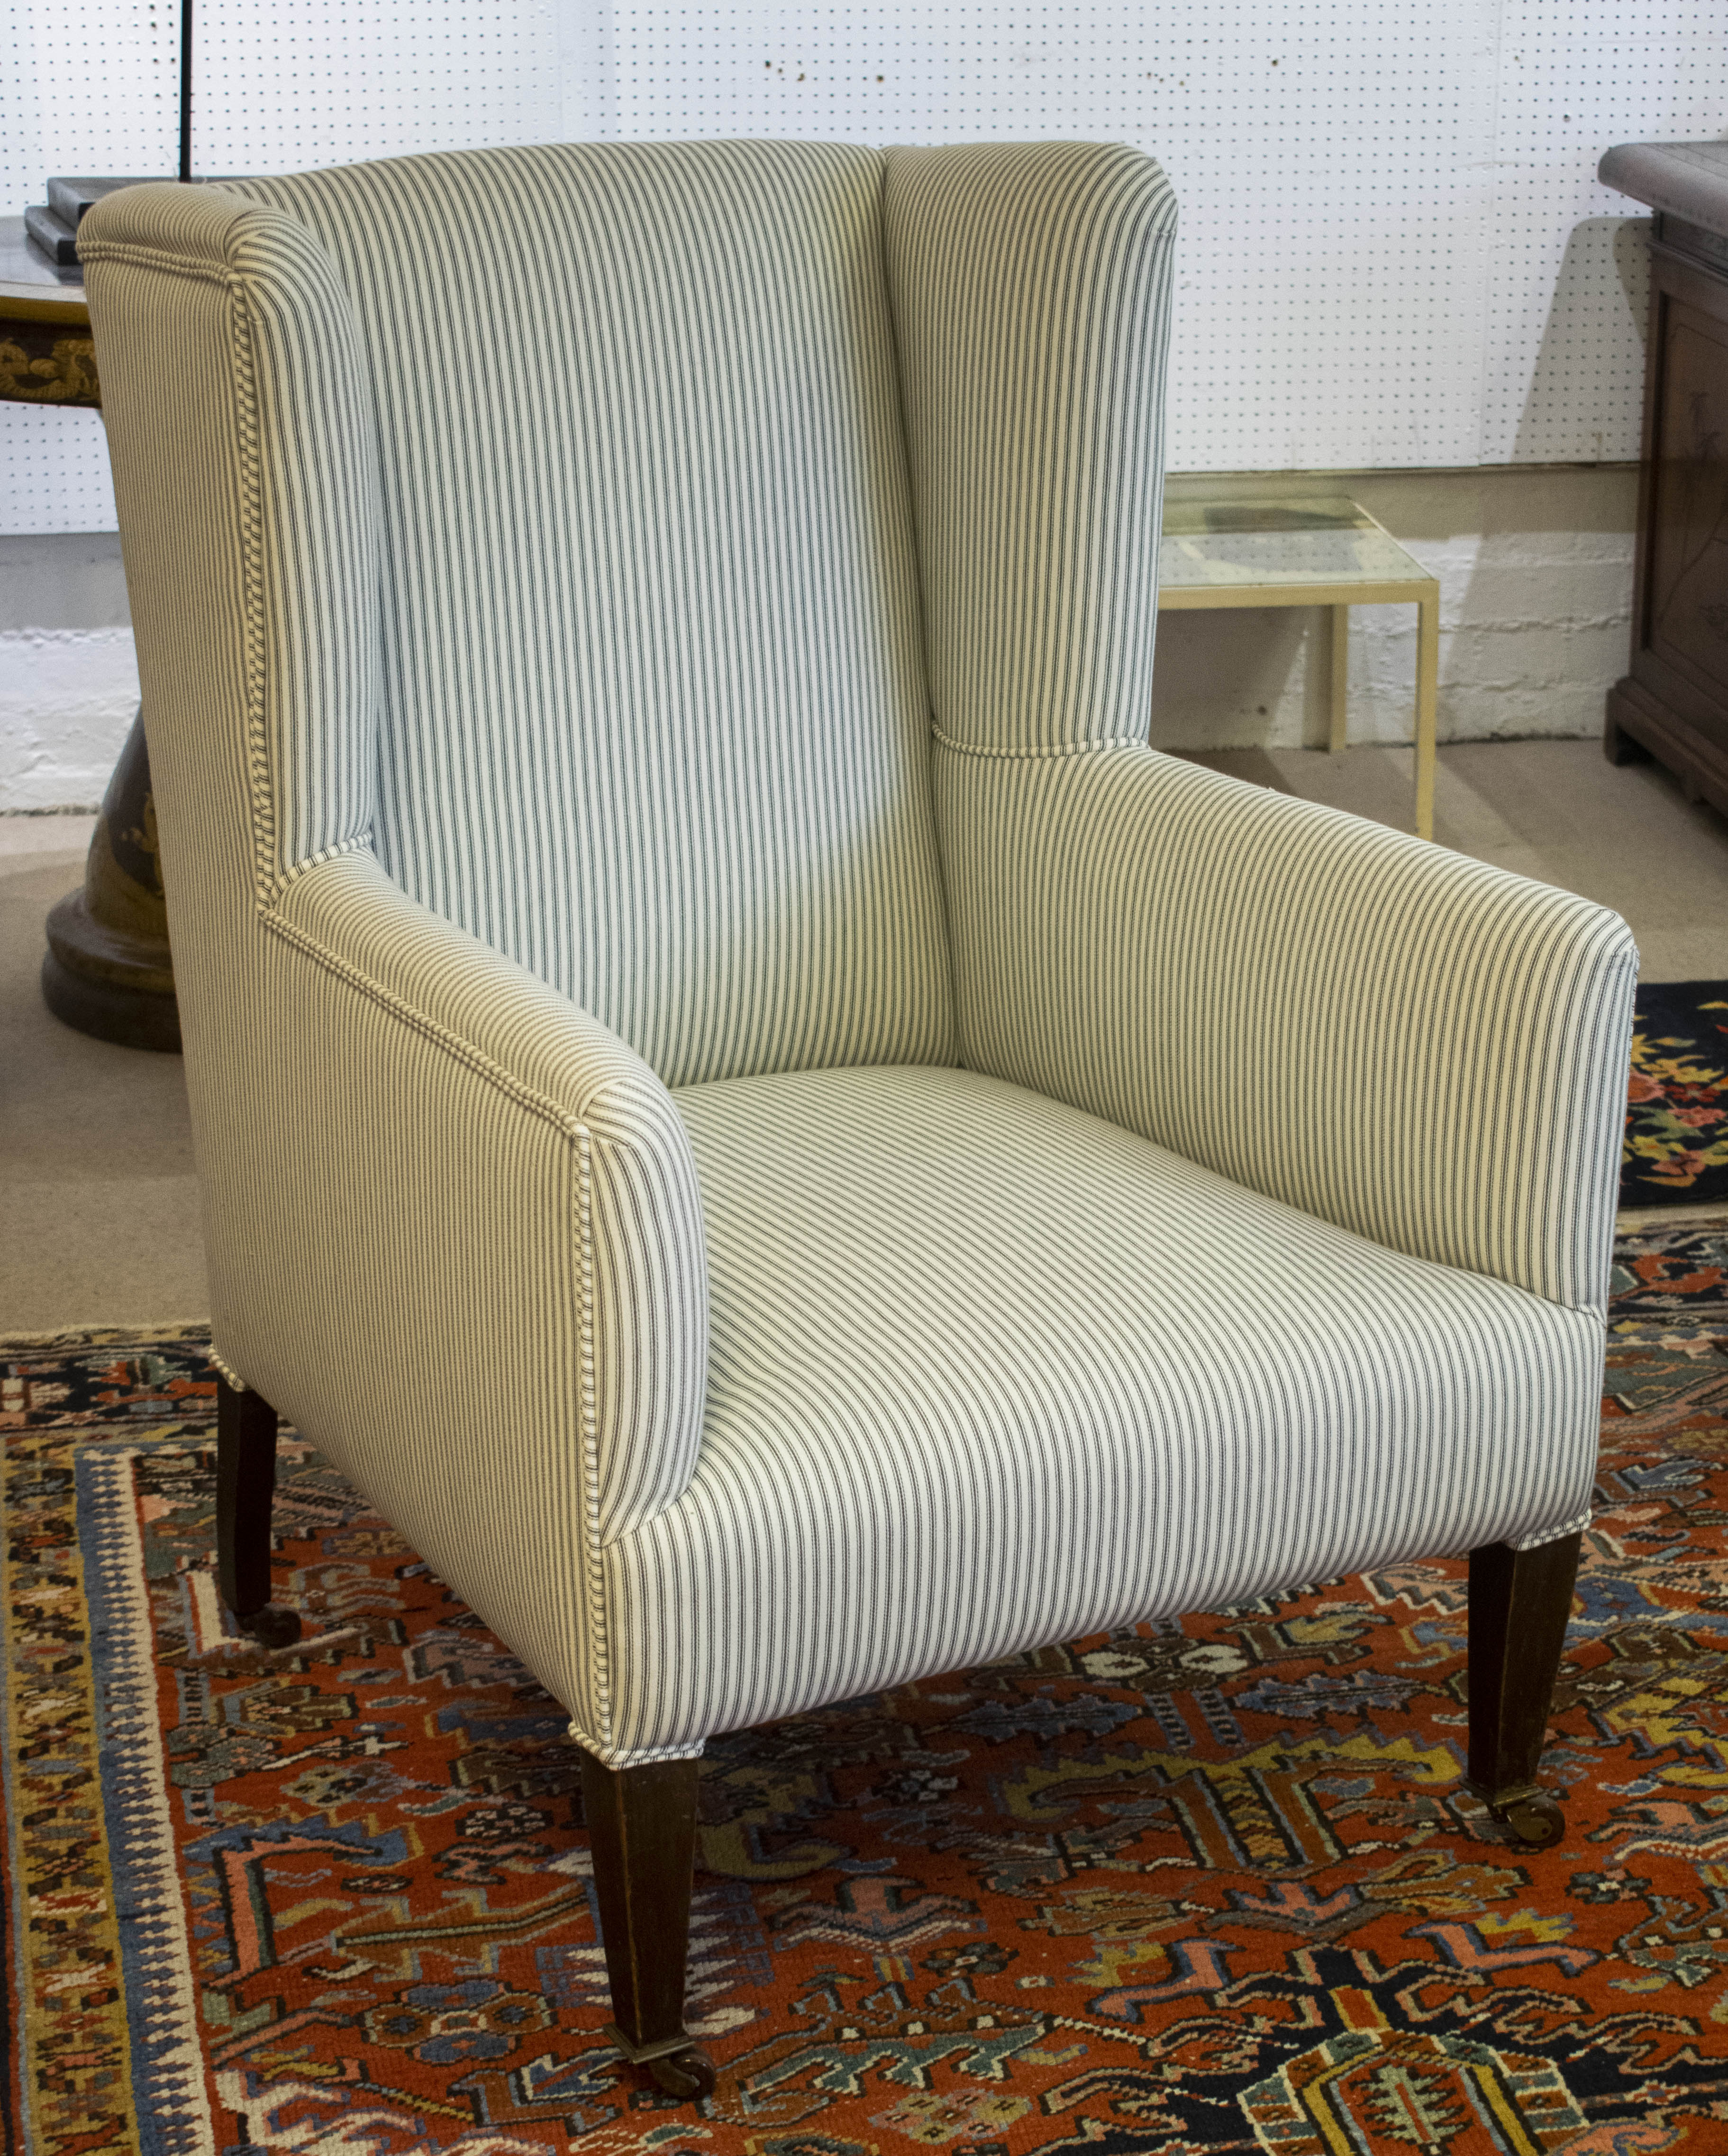 WING ARMCHAIR, 100cm H x 68cm W, Edwardian, newly upholstered in ticking on ceramic castors.